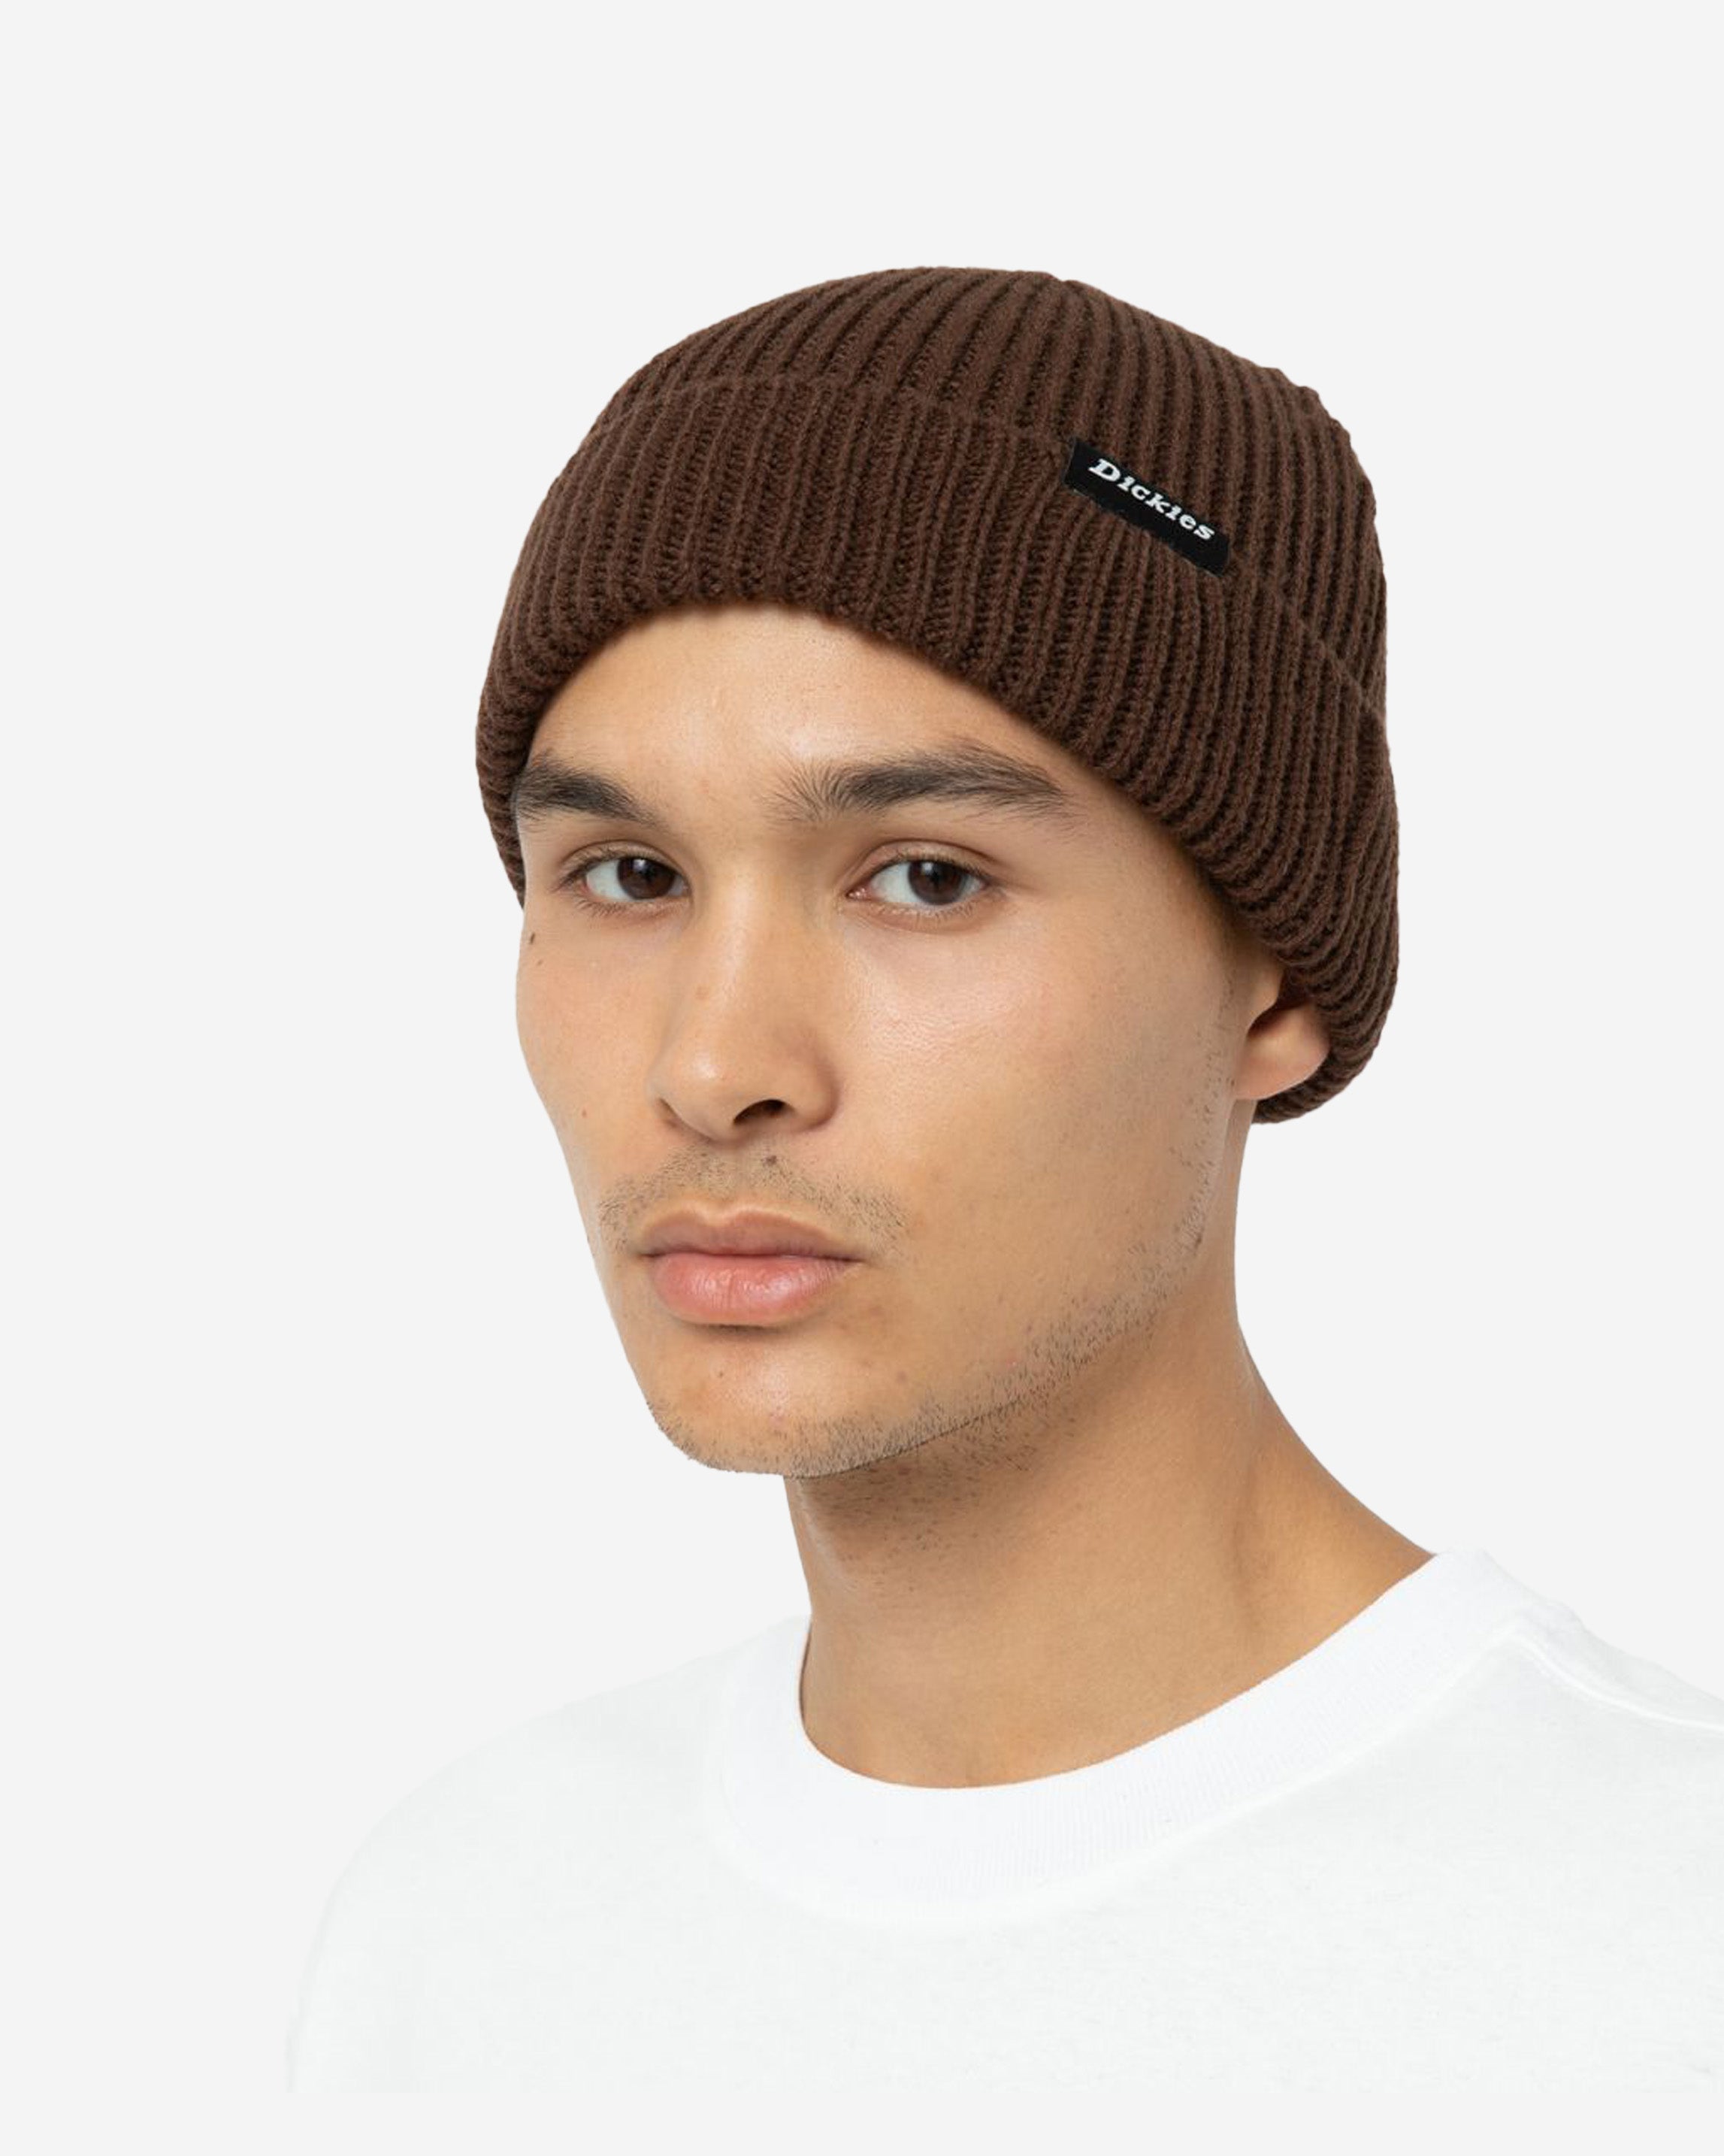 Get the perfect outdoor look with the classic Woodworth beanie hat. Made from anti-bobble acrylic that's easy to wash, this basic hat is built for warmth and will look good with whatever you have on. Available in several muted shades